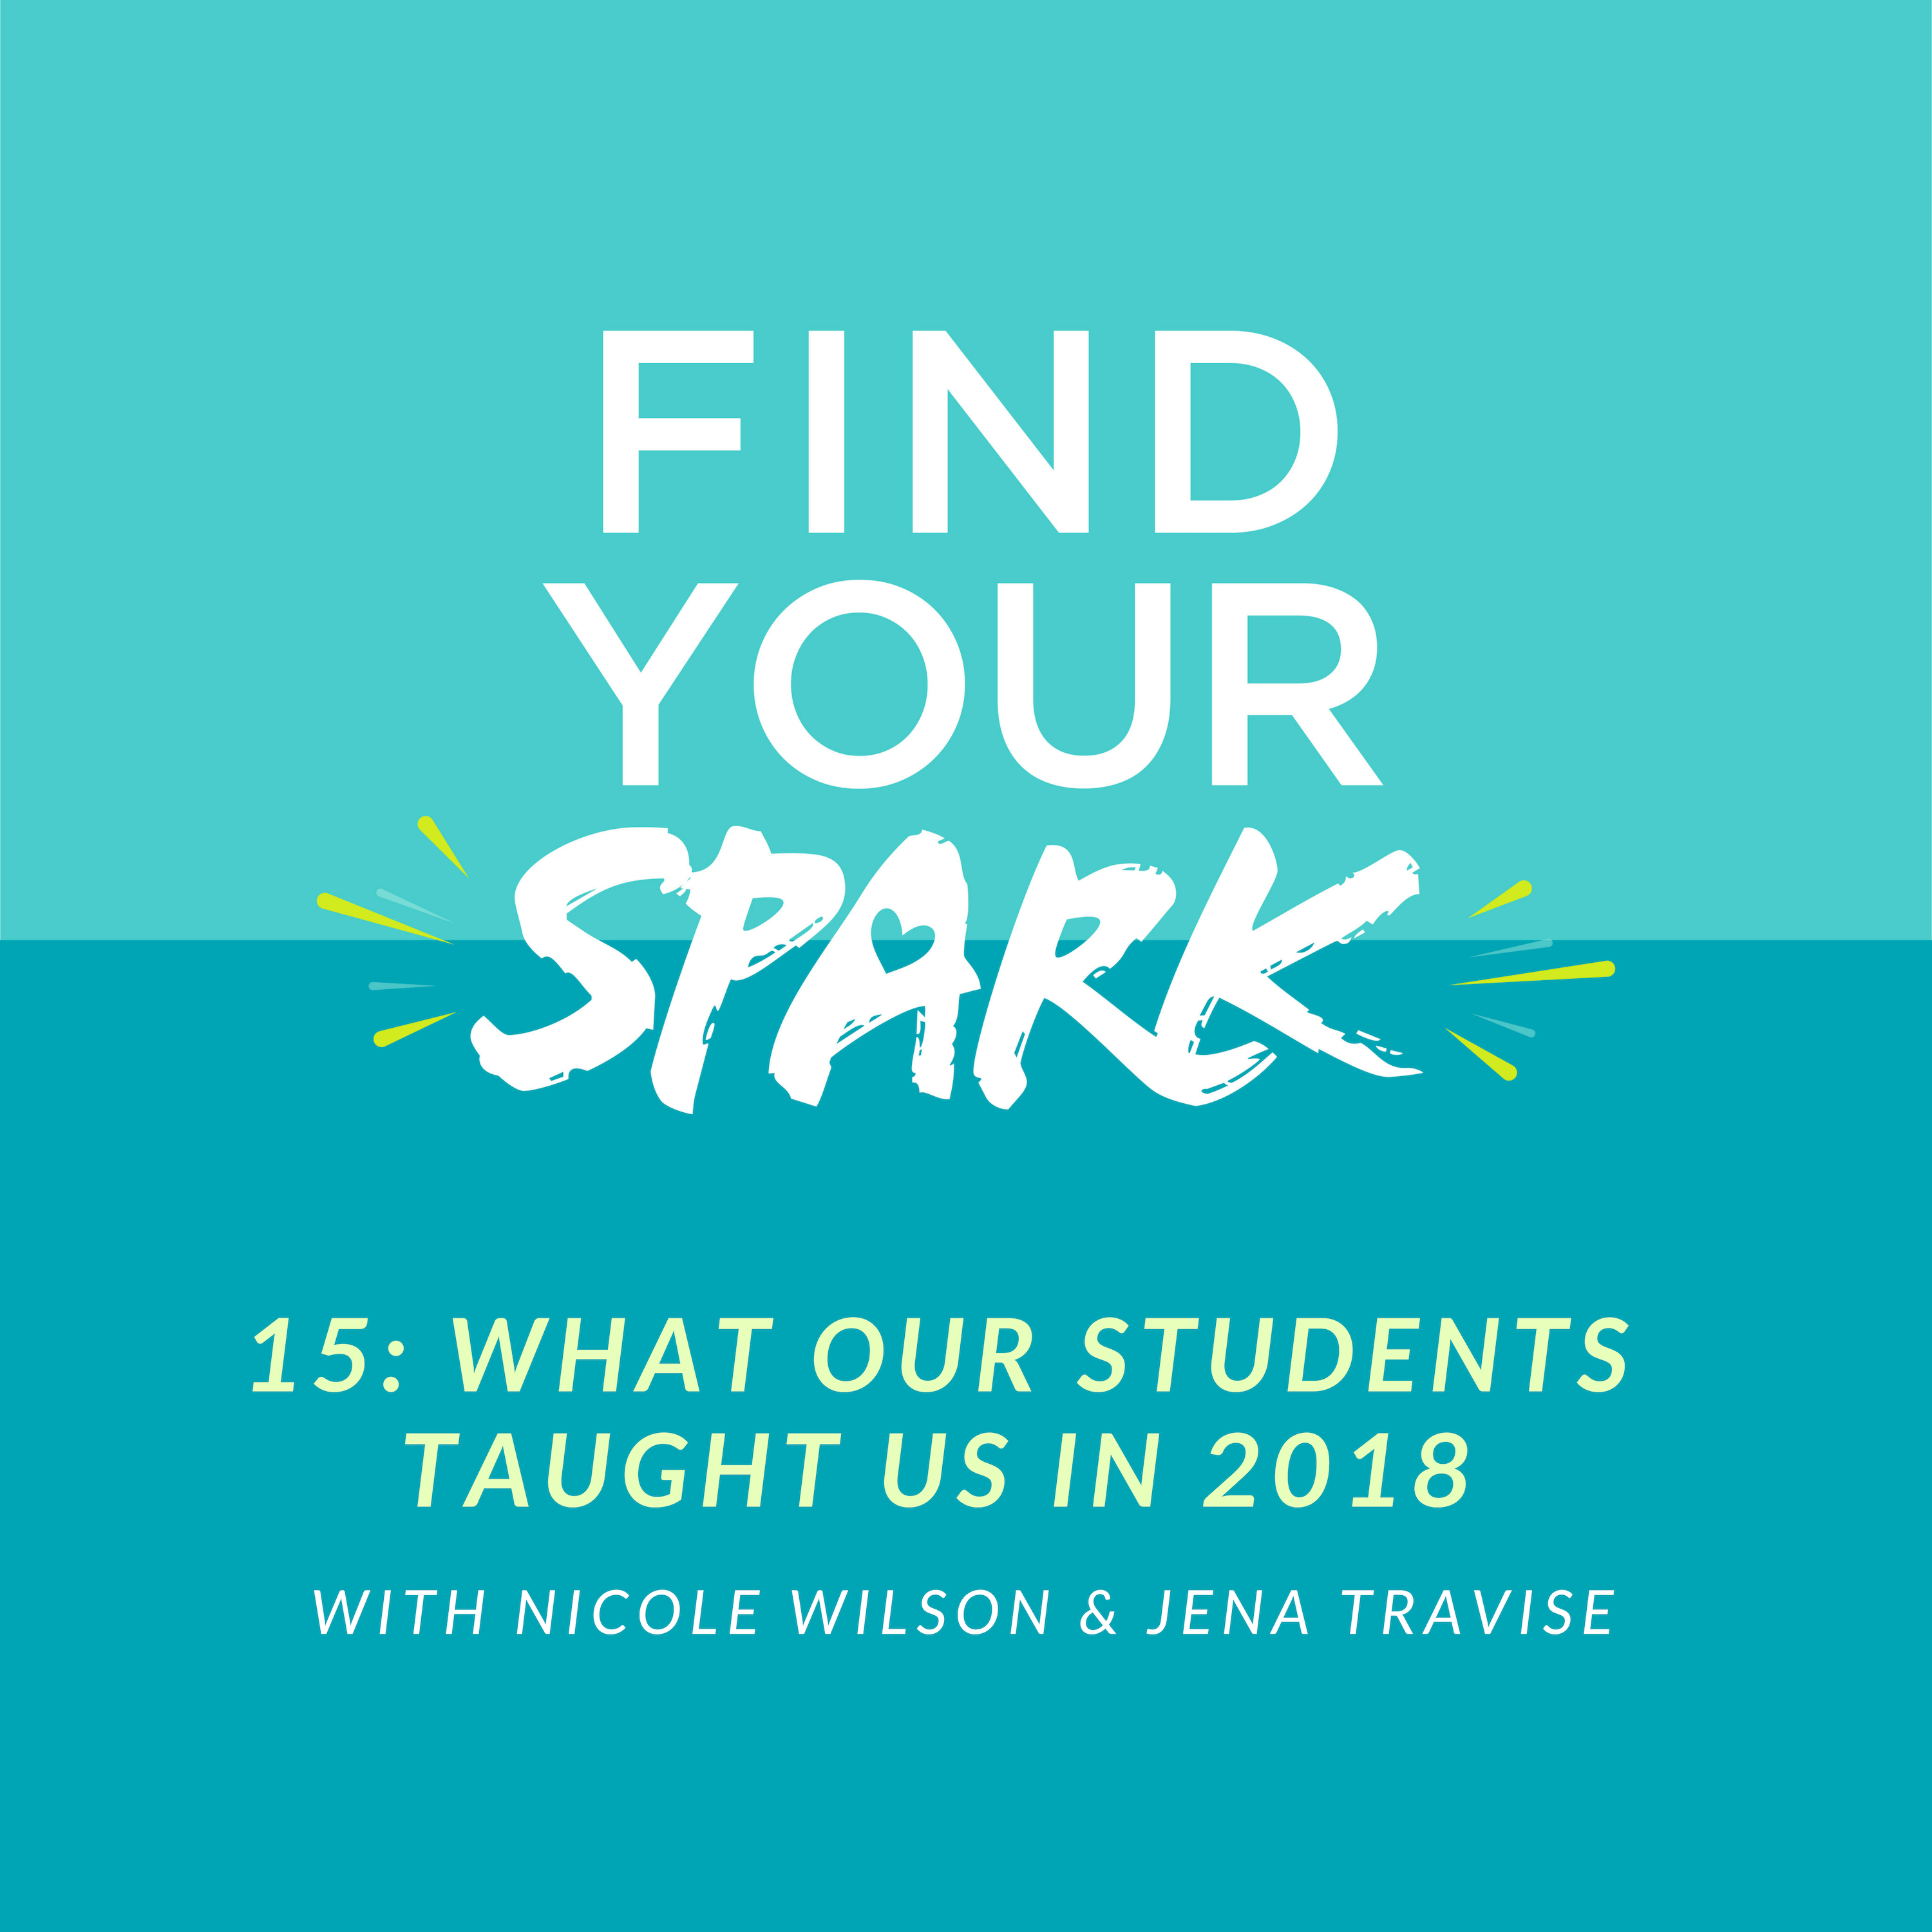 15: What Our Student Taught Us in 2018